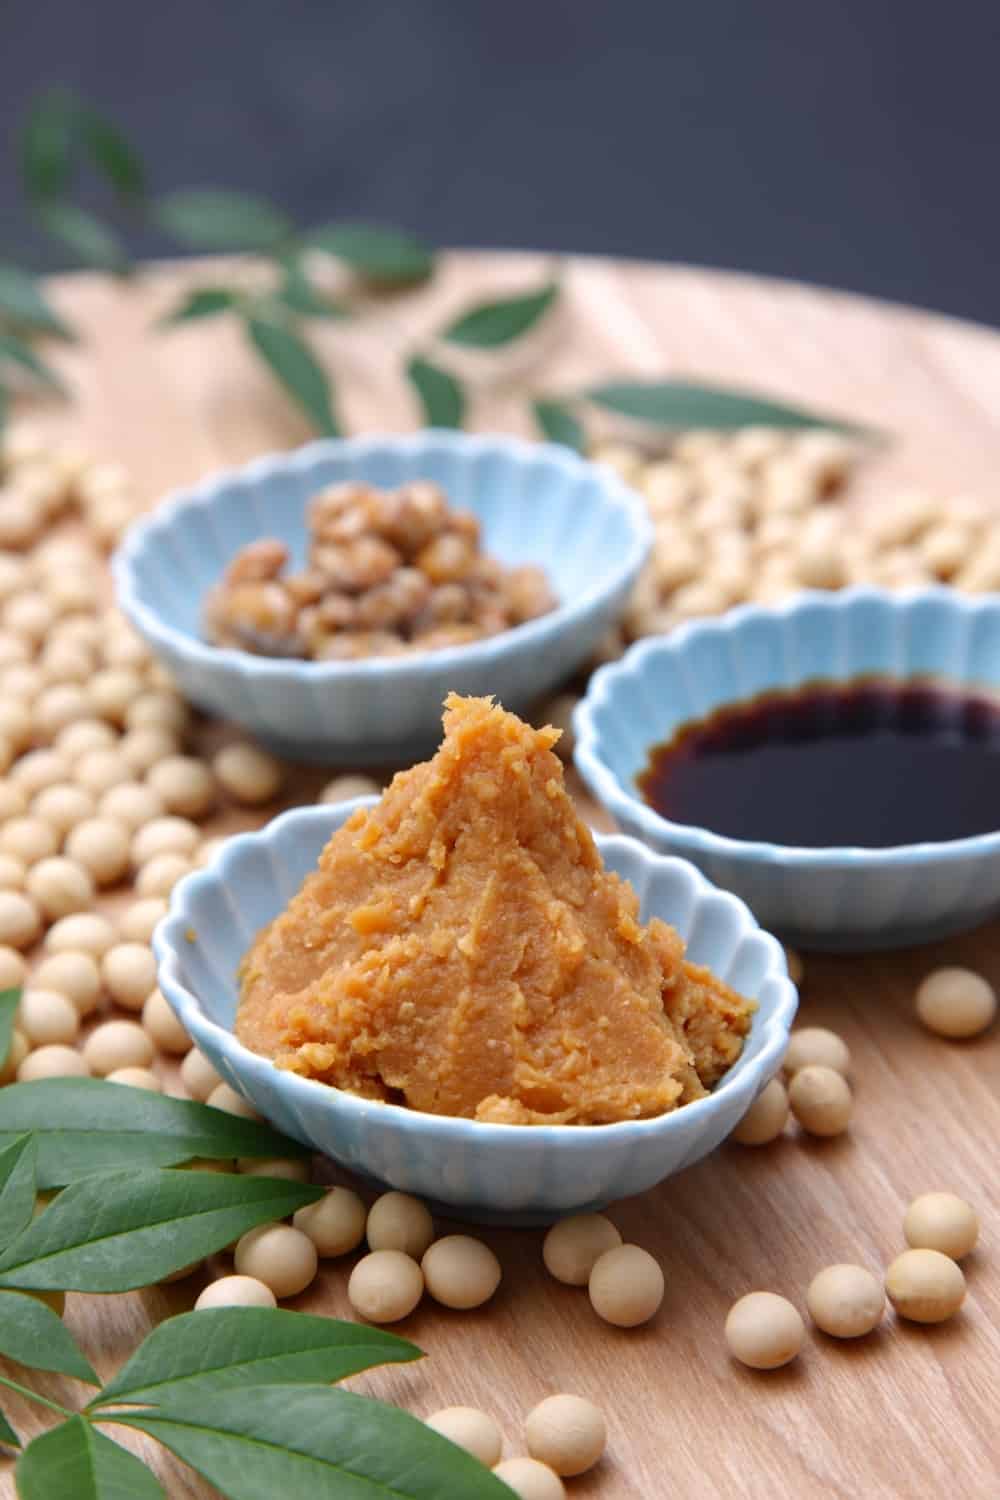 miso paste and other soybean products